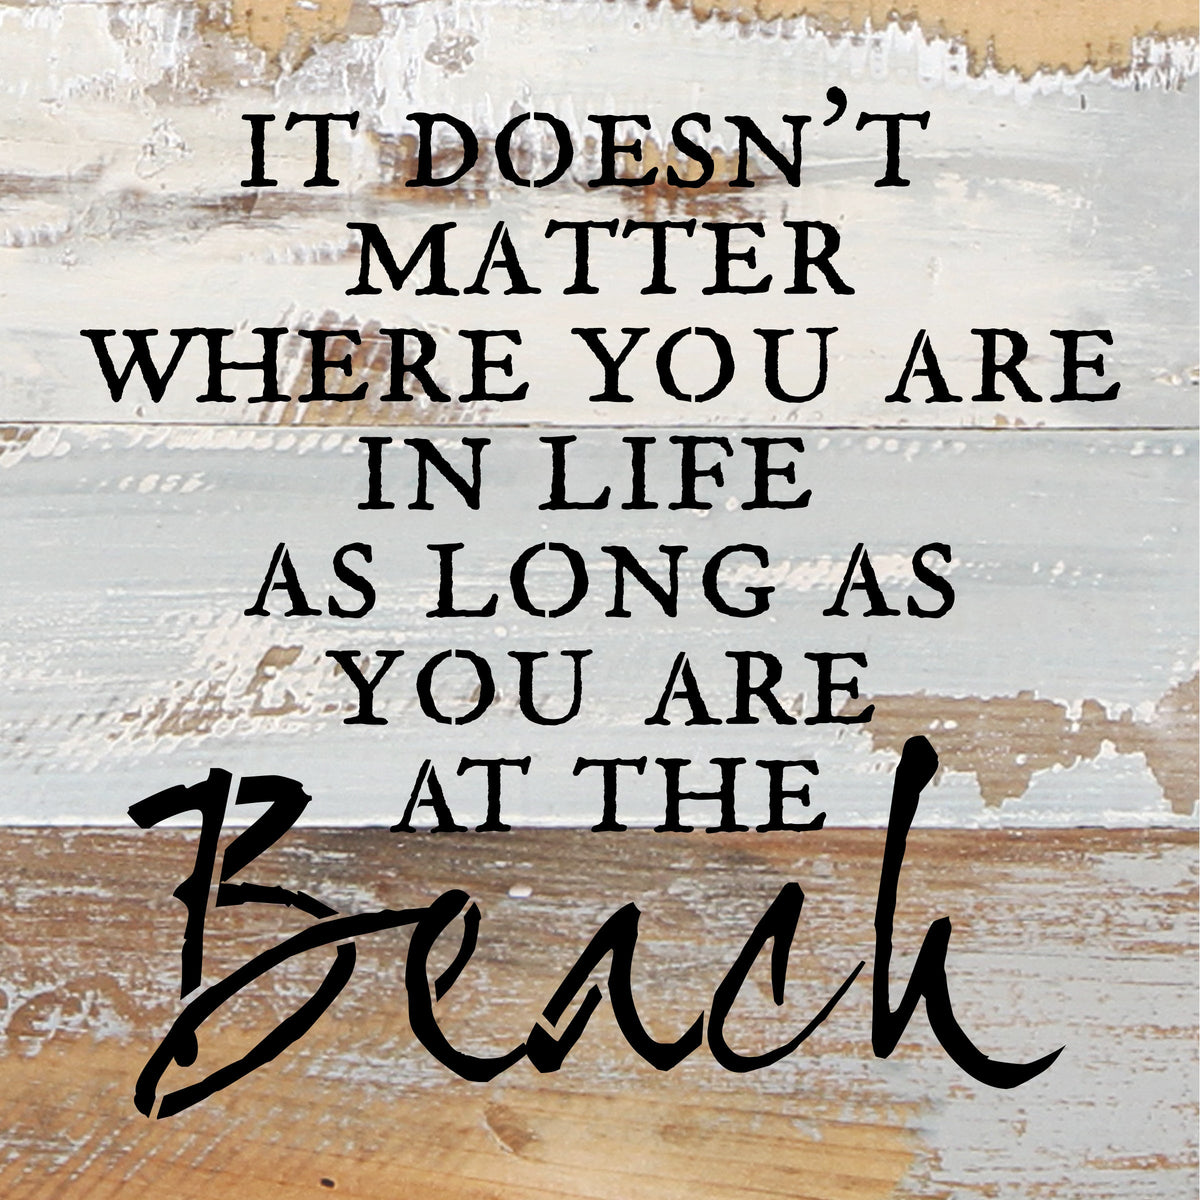 It doesn't matter where you are in life as long as you are at the beach. / 8x8 Reclaimed Wood Wall Art